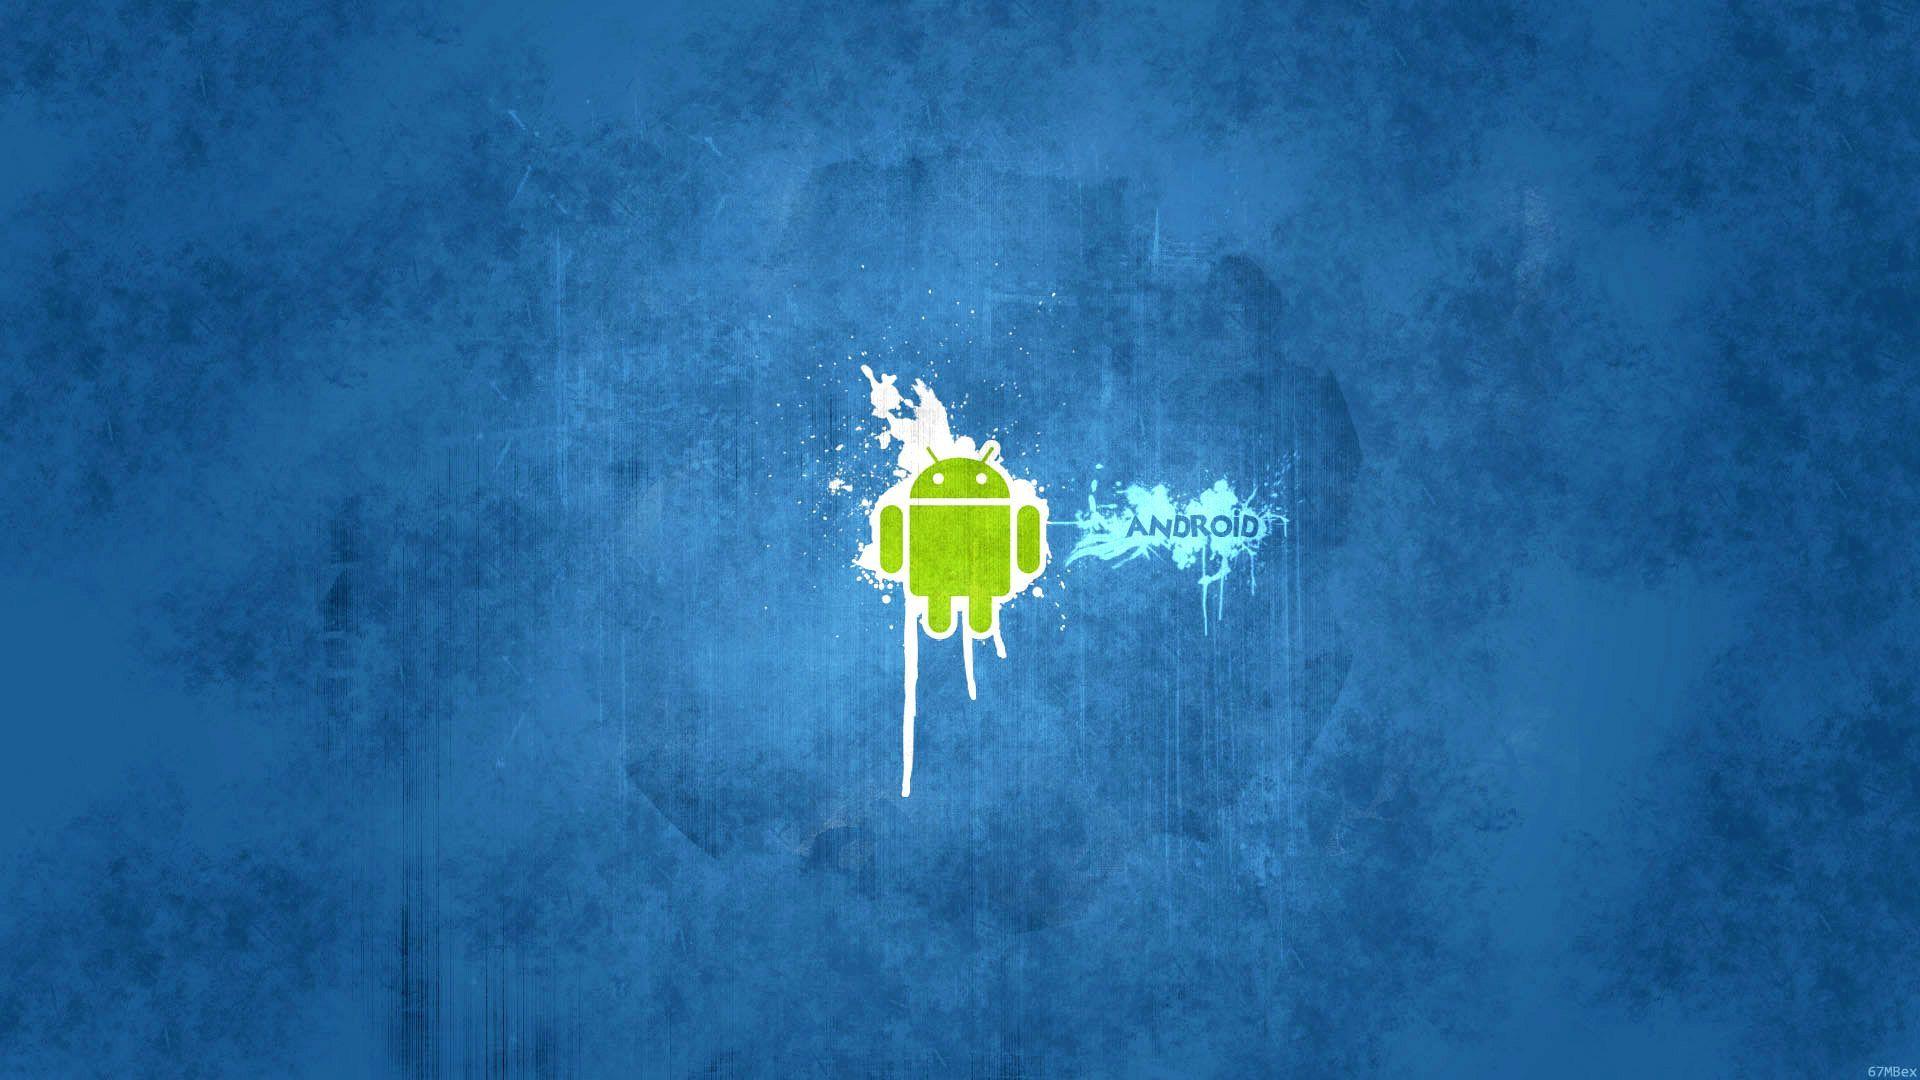 Wallpaper, apple, android, wallpaper, eating, blue. Technology